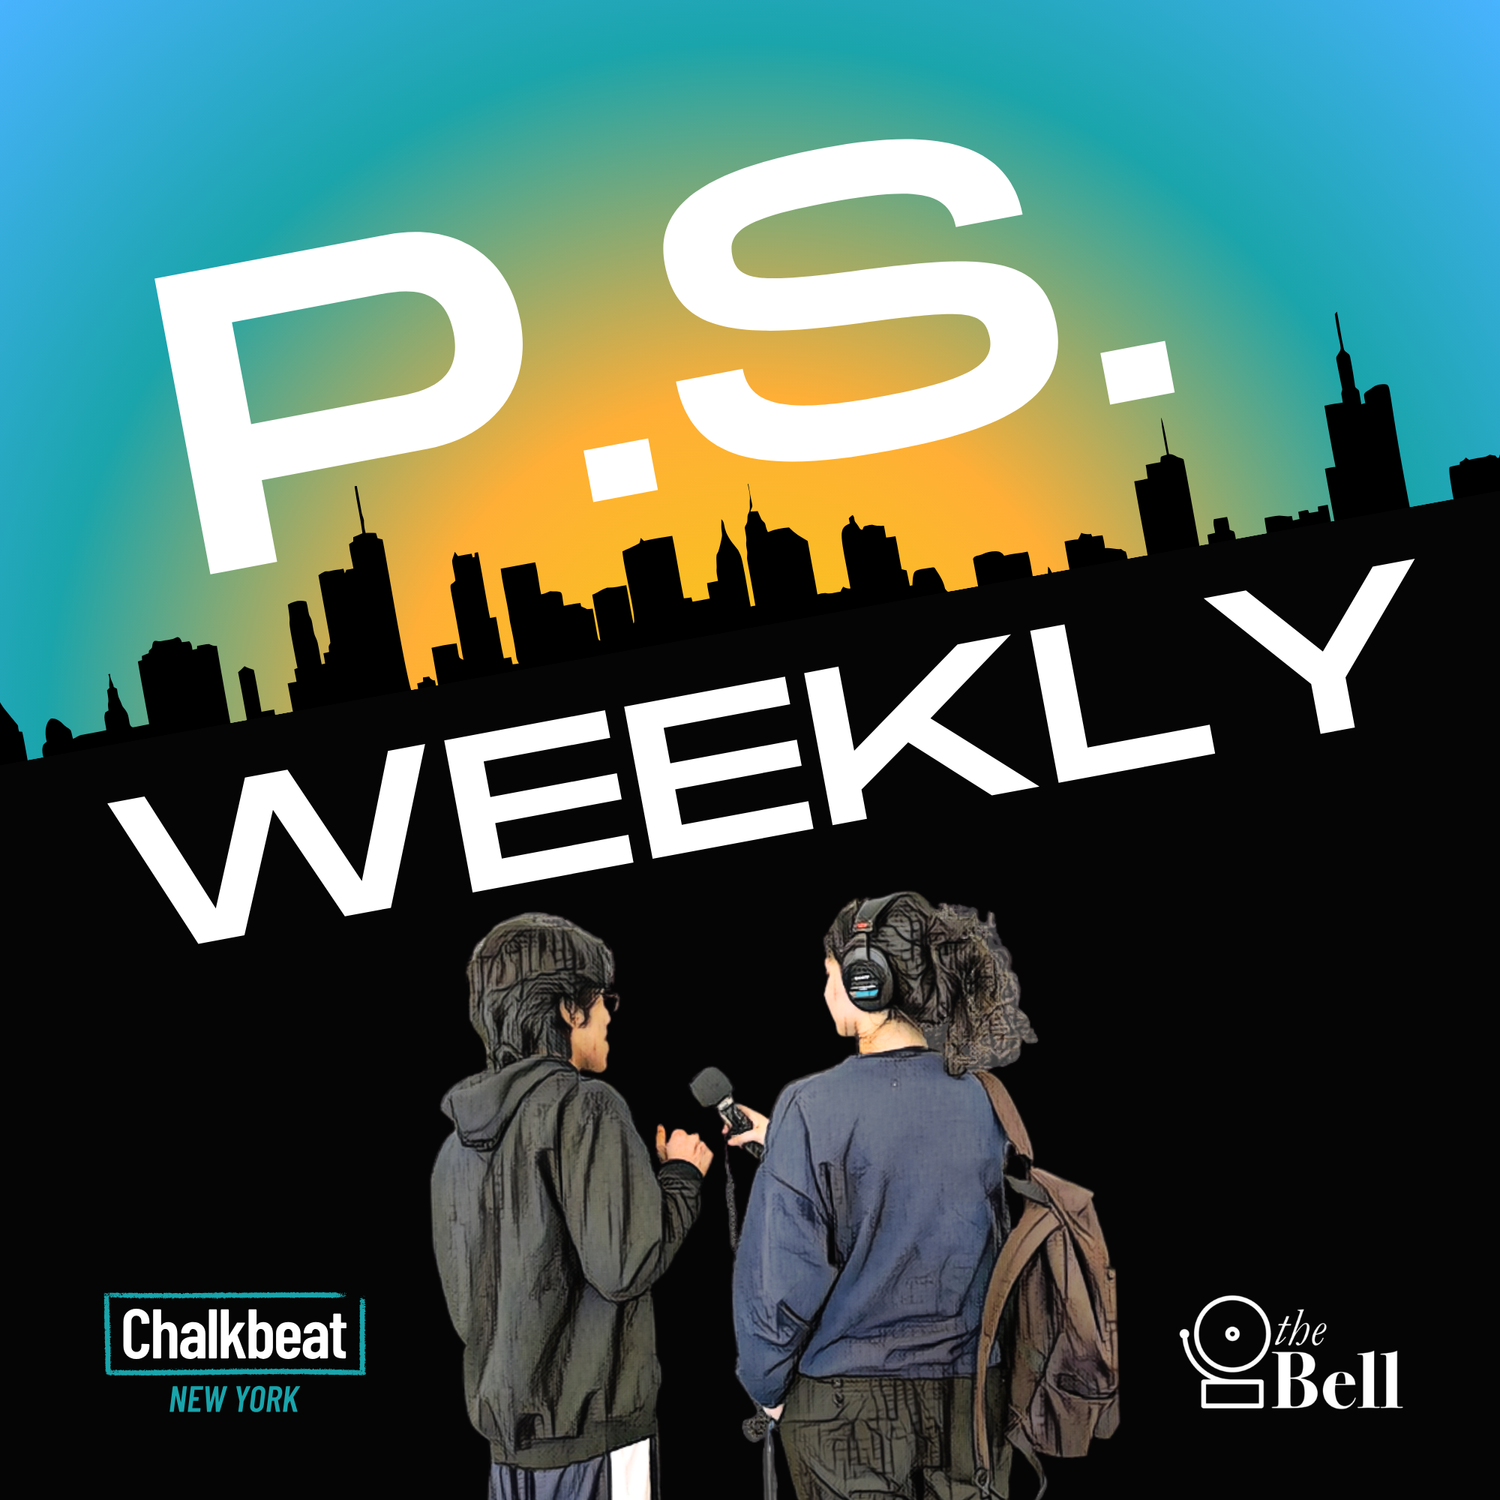 (Re)introducing P.S. Weekly